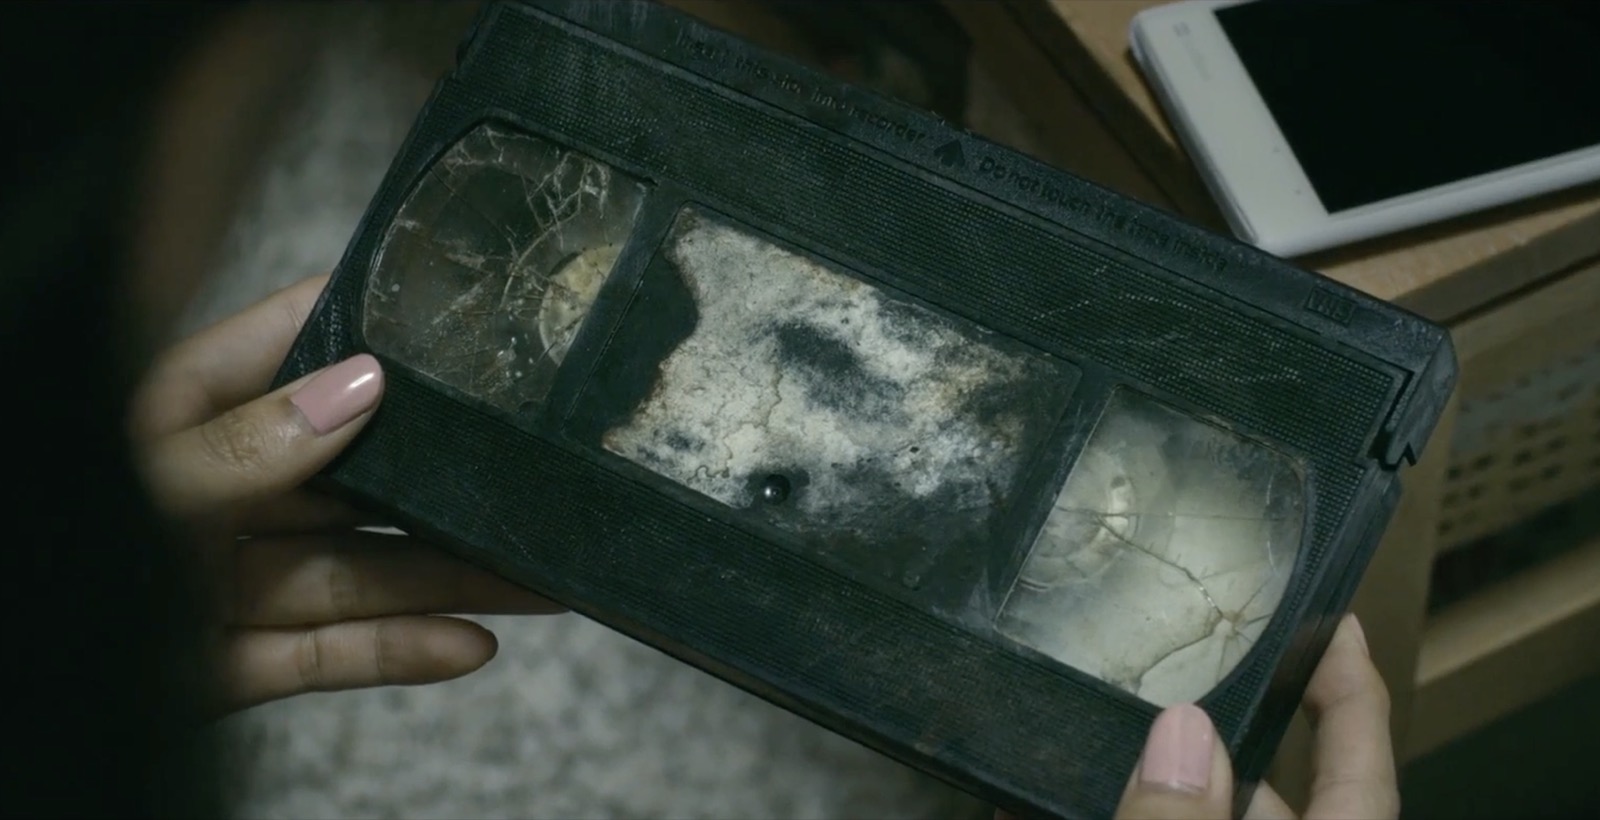 Only a True Movie Nerd Can Get 15/15 on This Movie Quotes Quiz. Can You? The Ring Video Tape